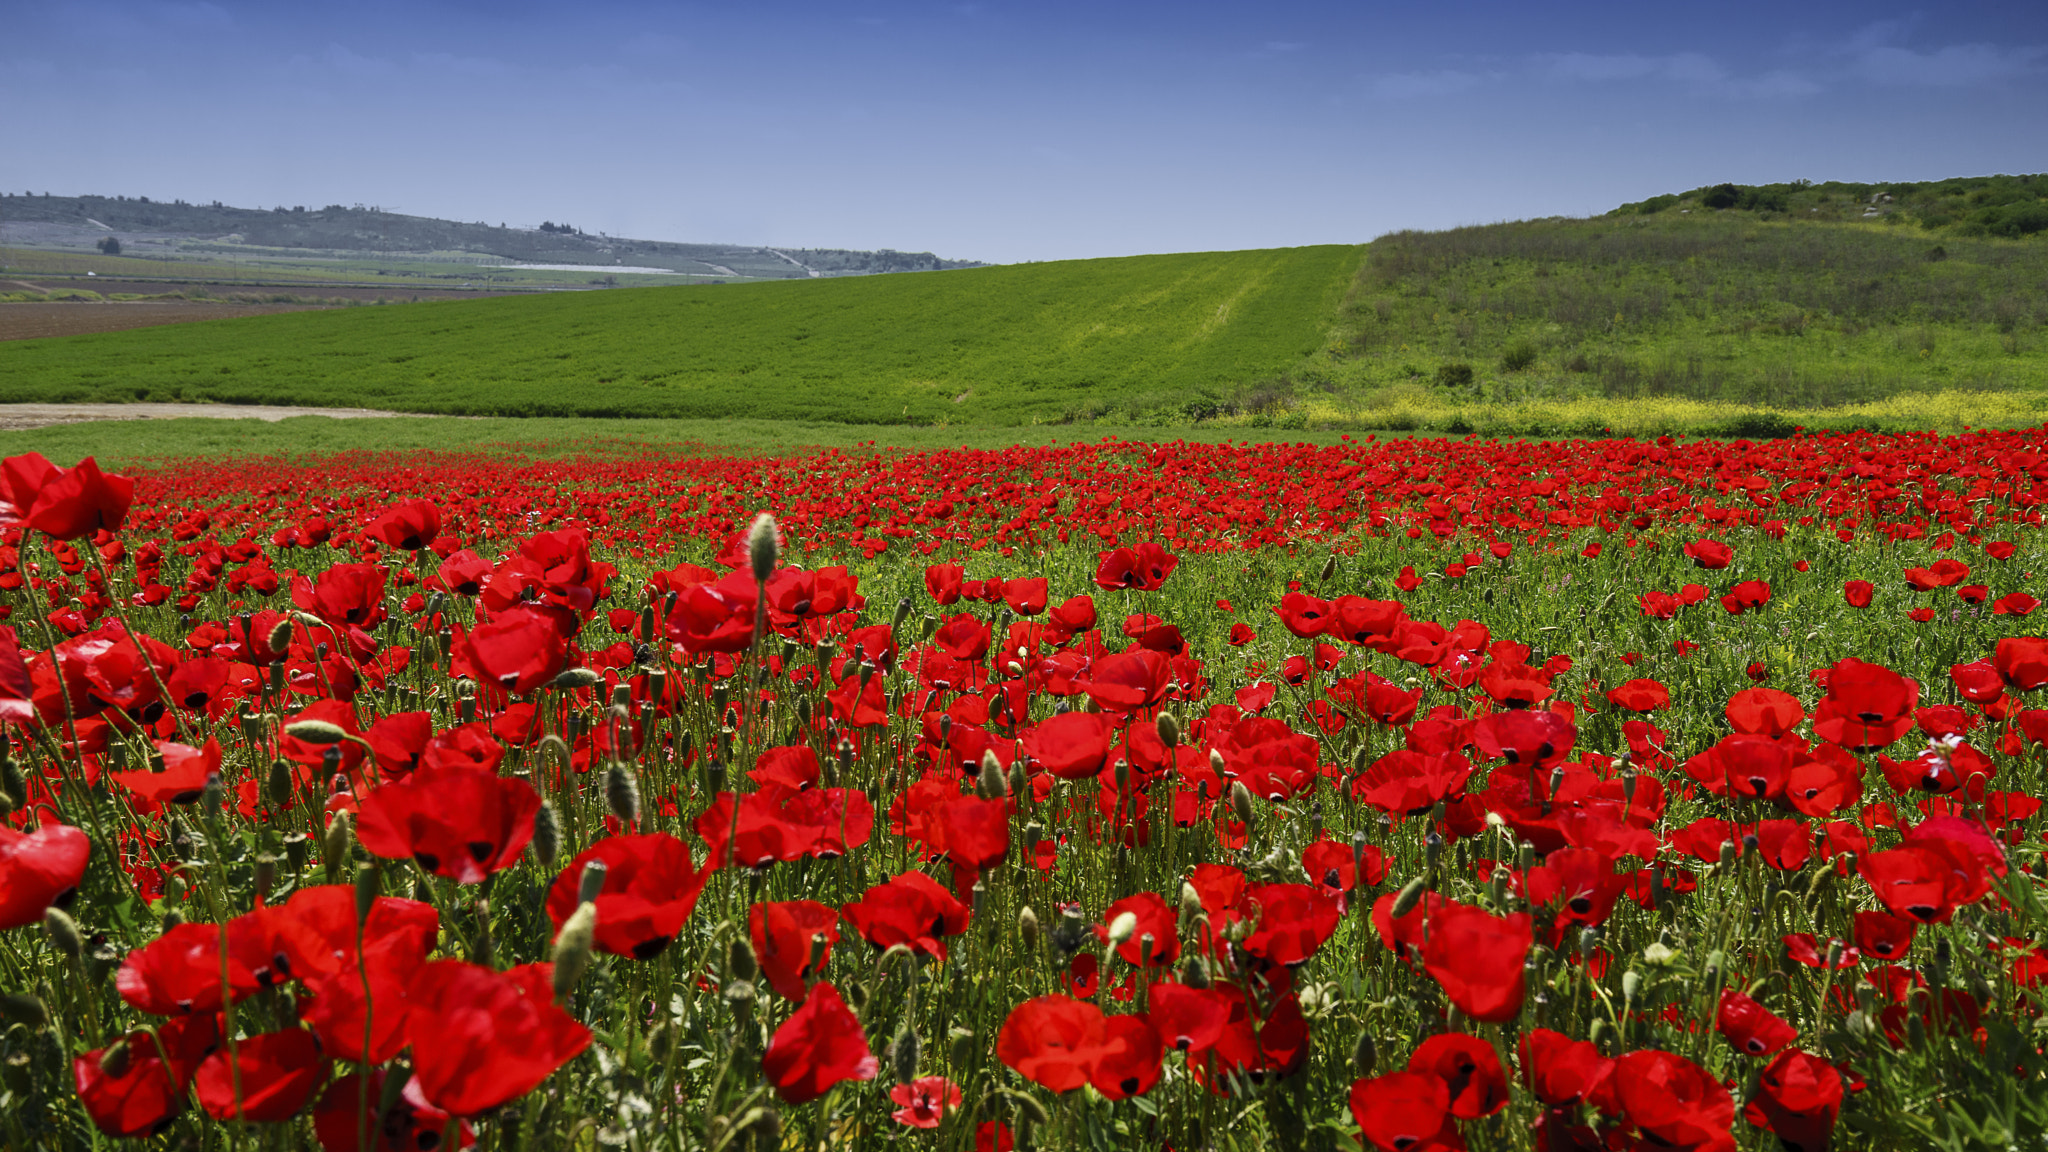 Sony a7 sample photo. Poppies field photography